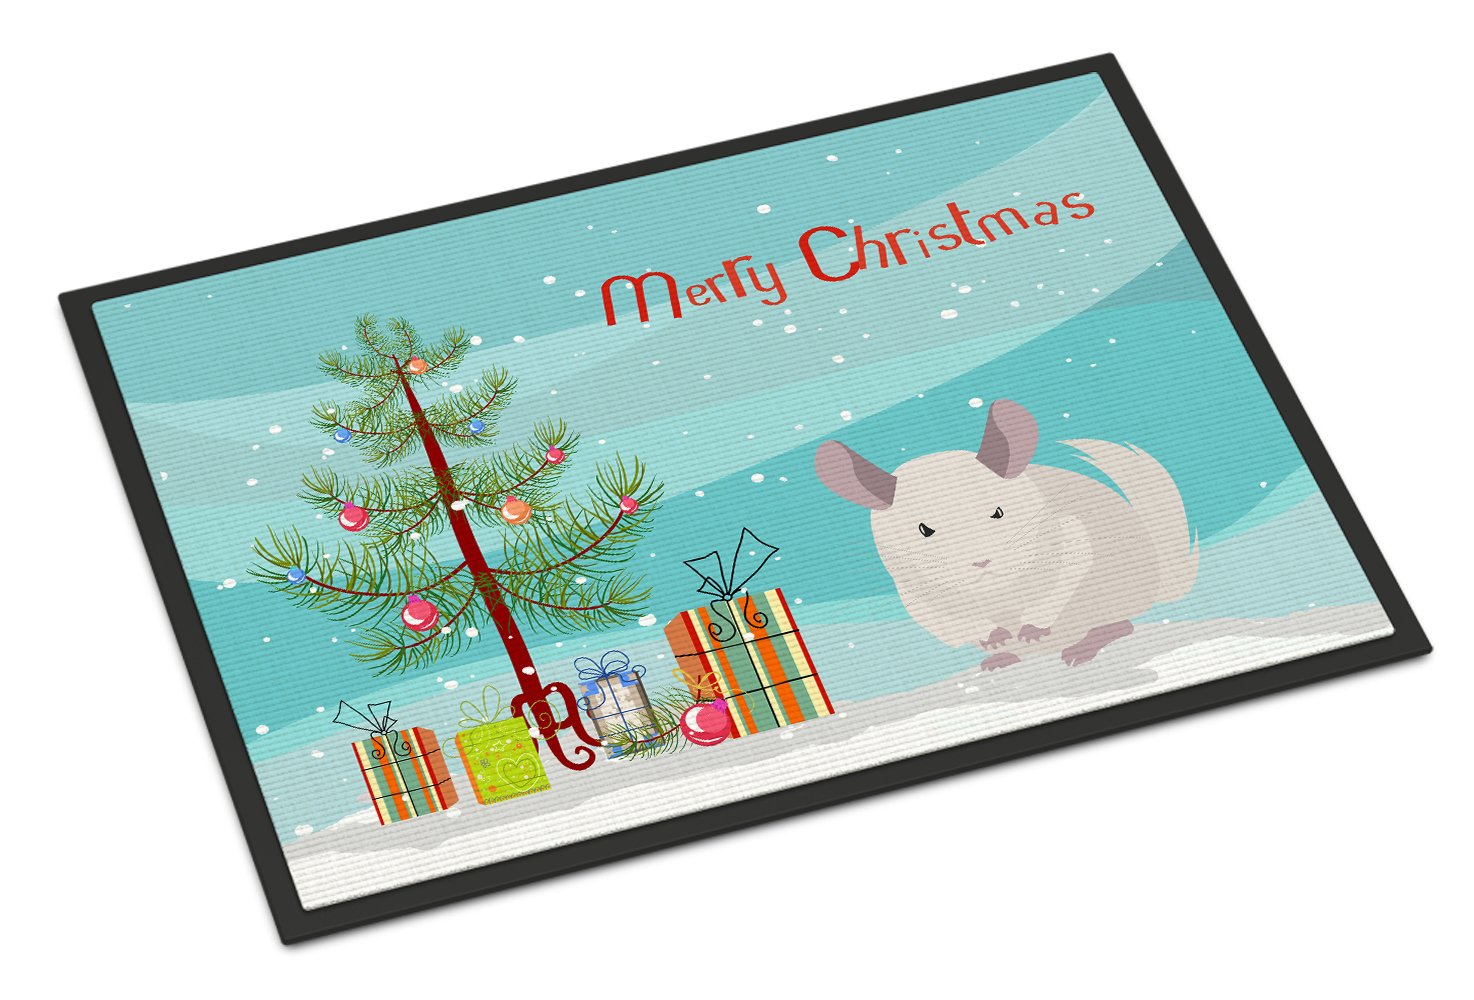 White Dominant Chinchilla Merry Christmas Indoor or Outdoor Mat 24x36 CK4437JMAT by Caroline's Treasures